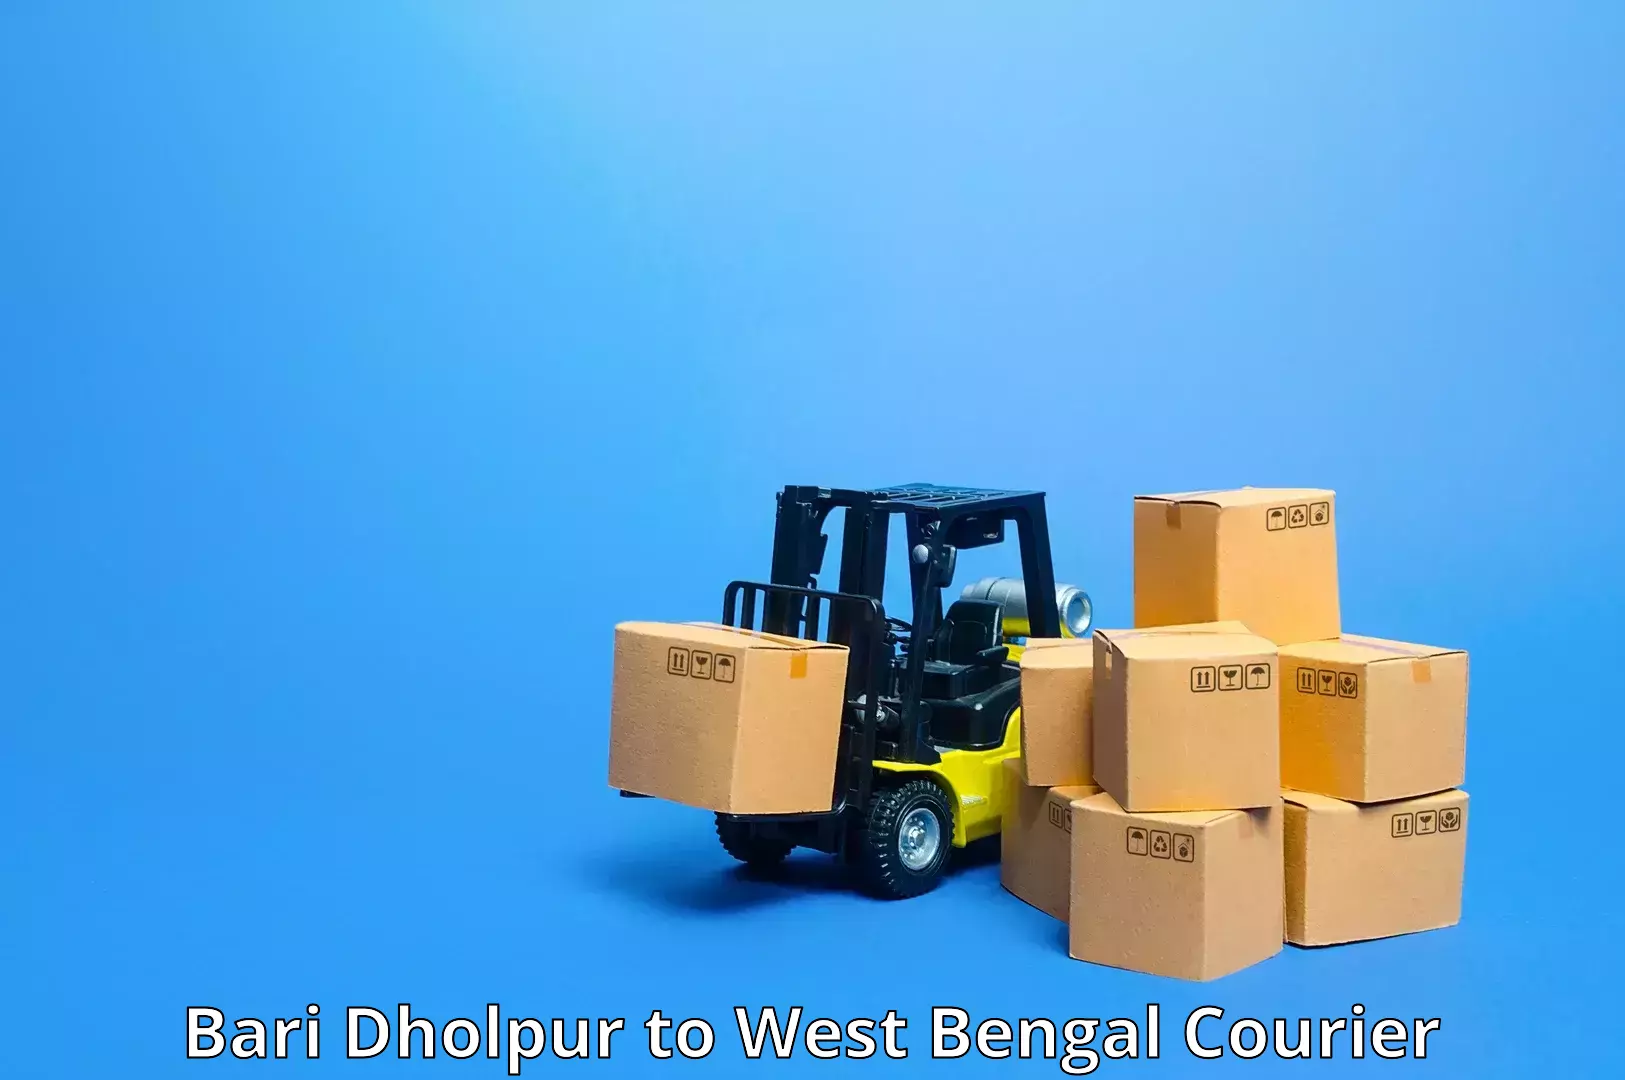 Parcel delivery automation Bari Dholpur to Jhargram